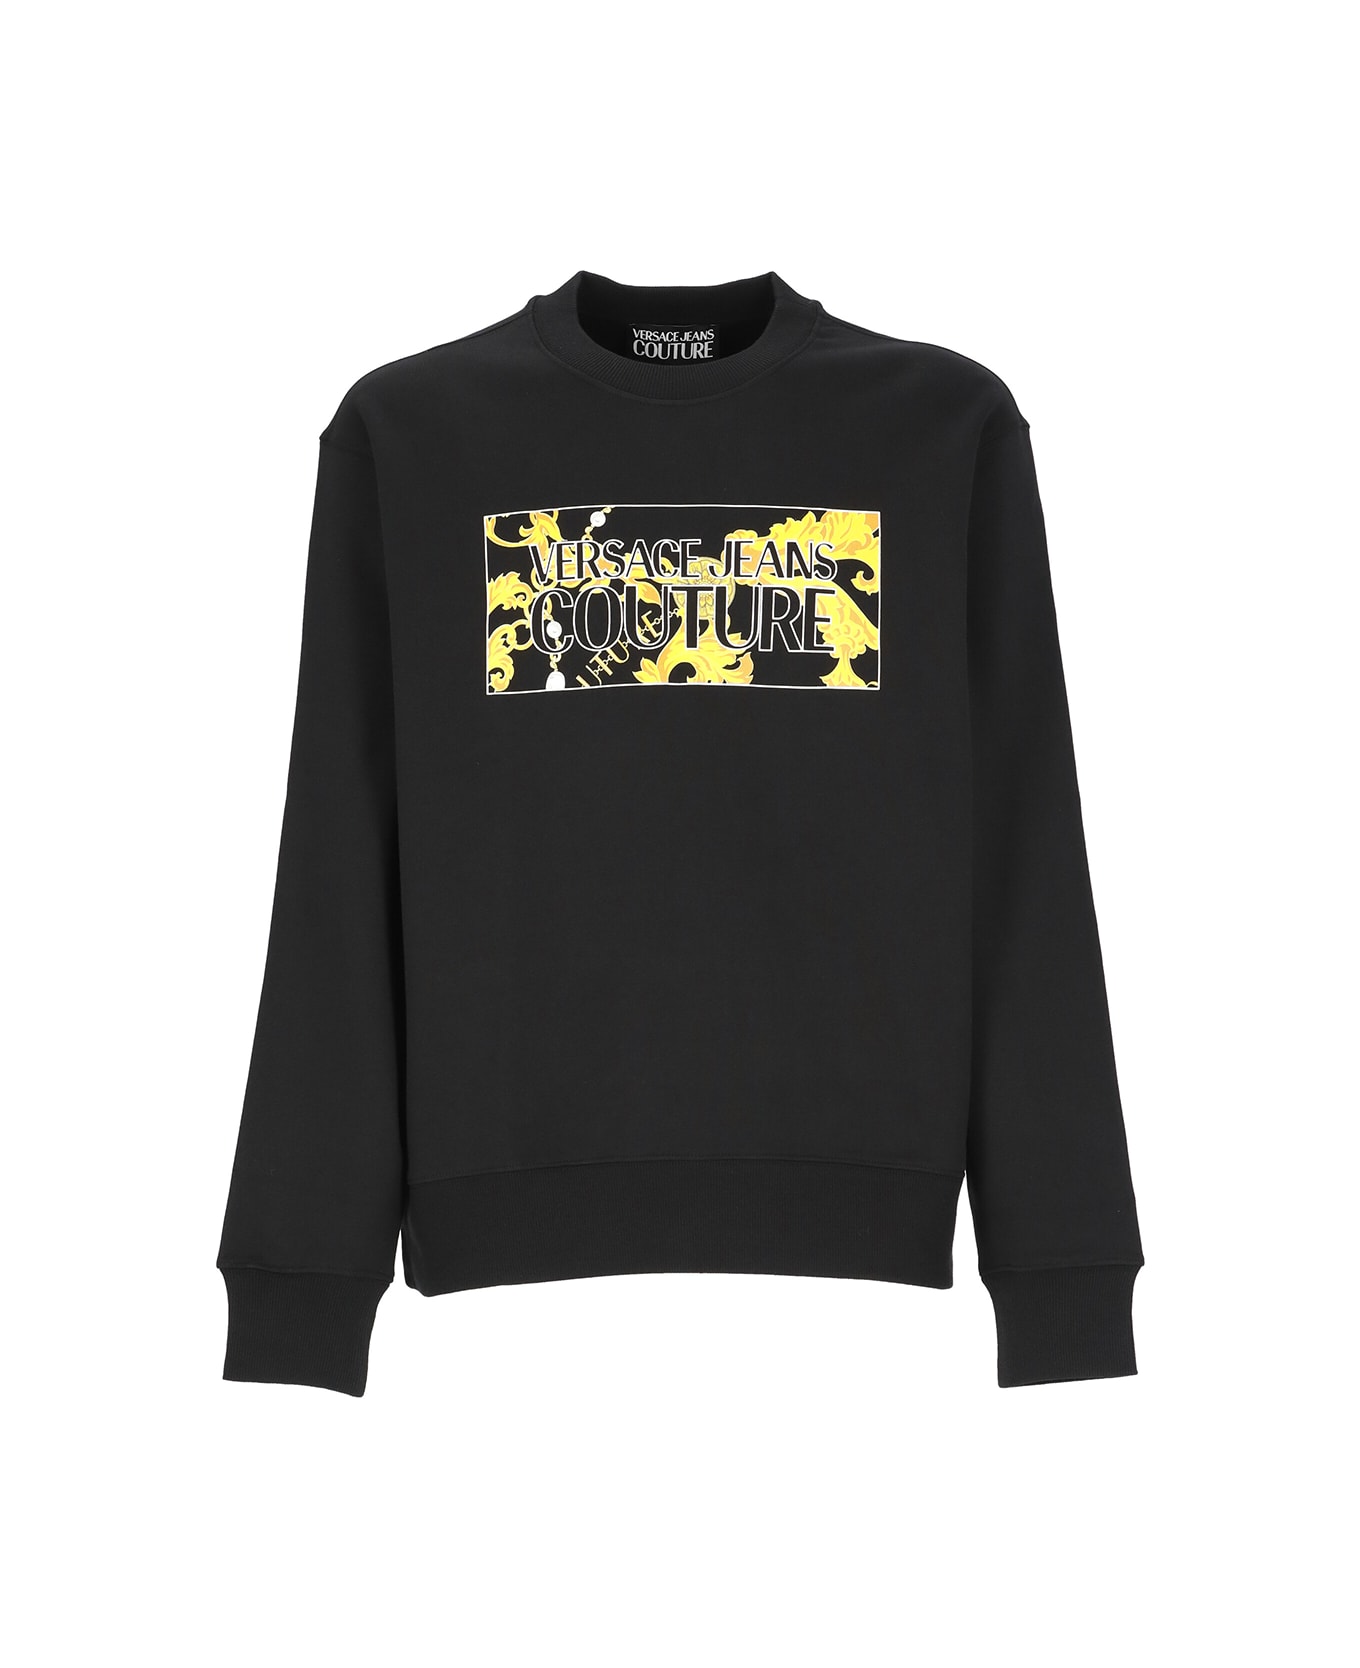 Versace Jeans Couture Versace Chain Couture Sweatshirt - Black フリース